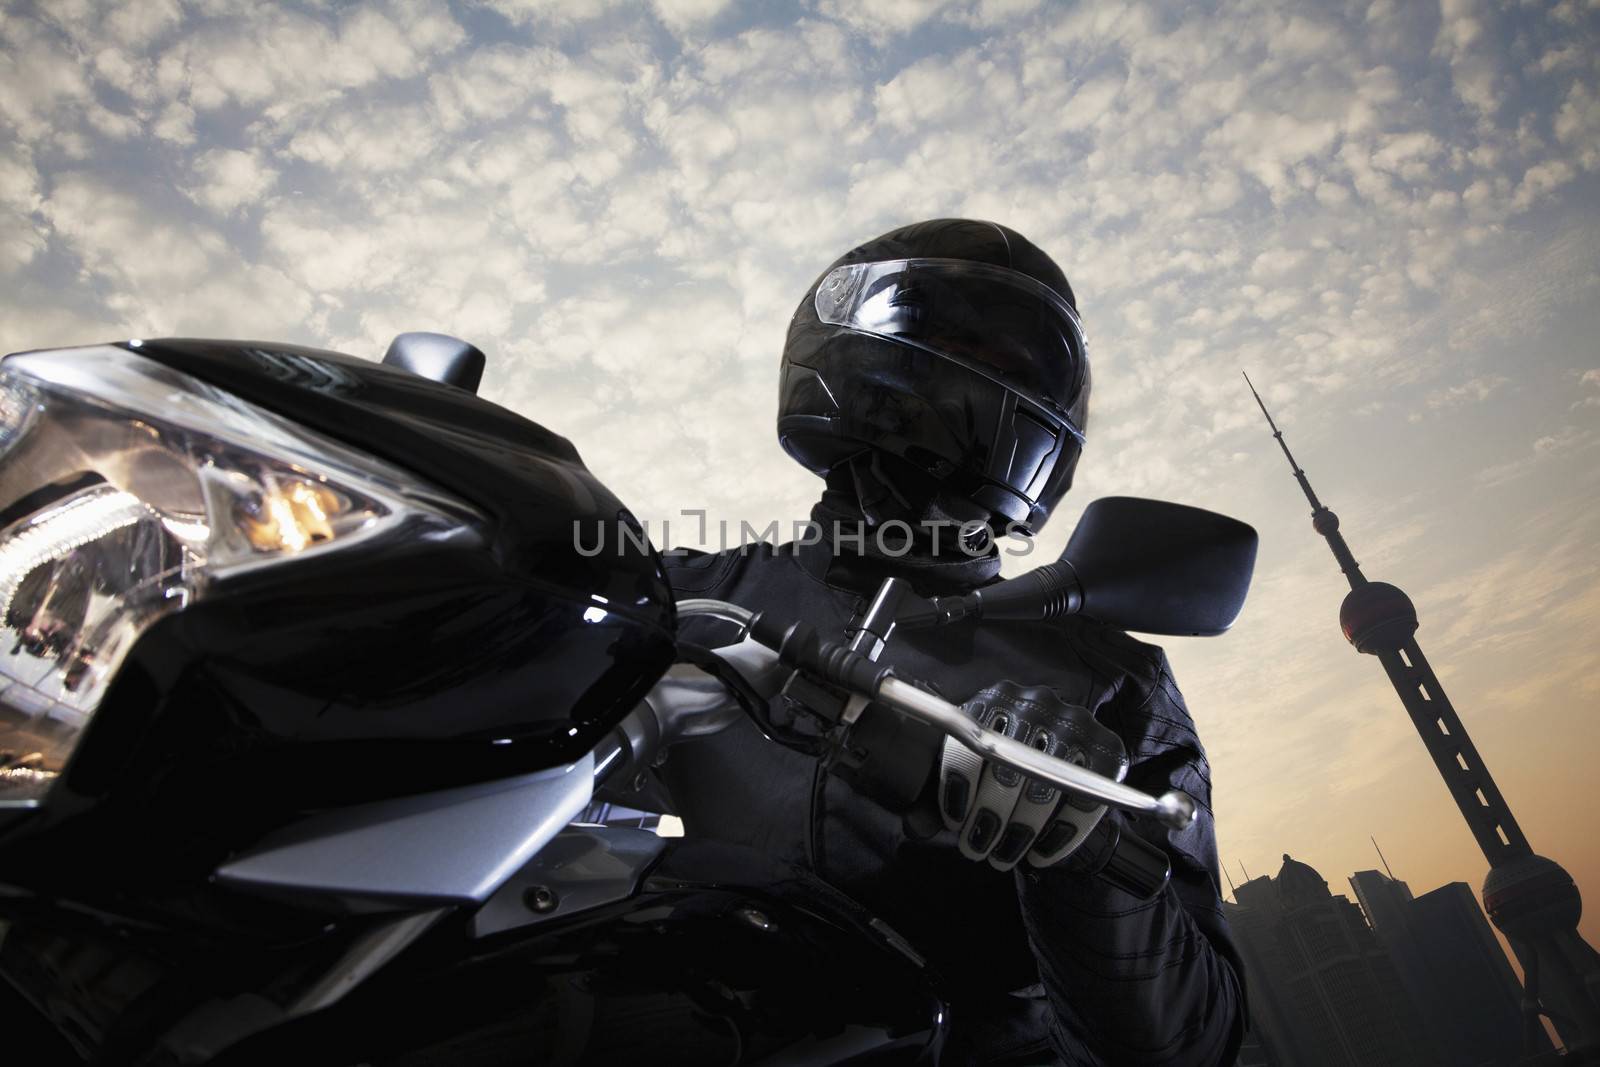 Young man riding a motorcycle during the day, sky and building exteriors in the background